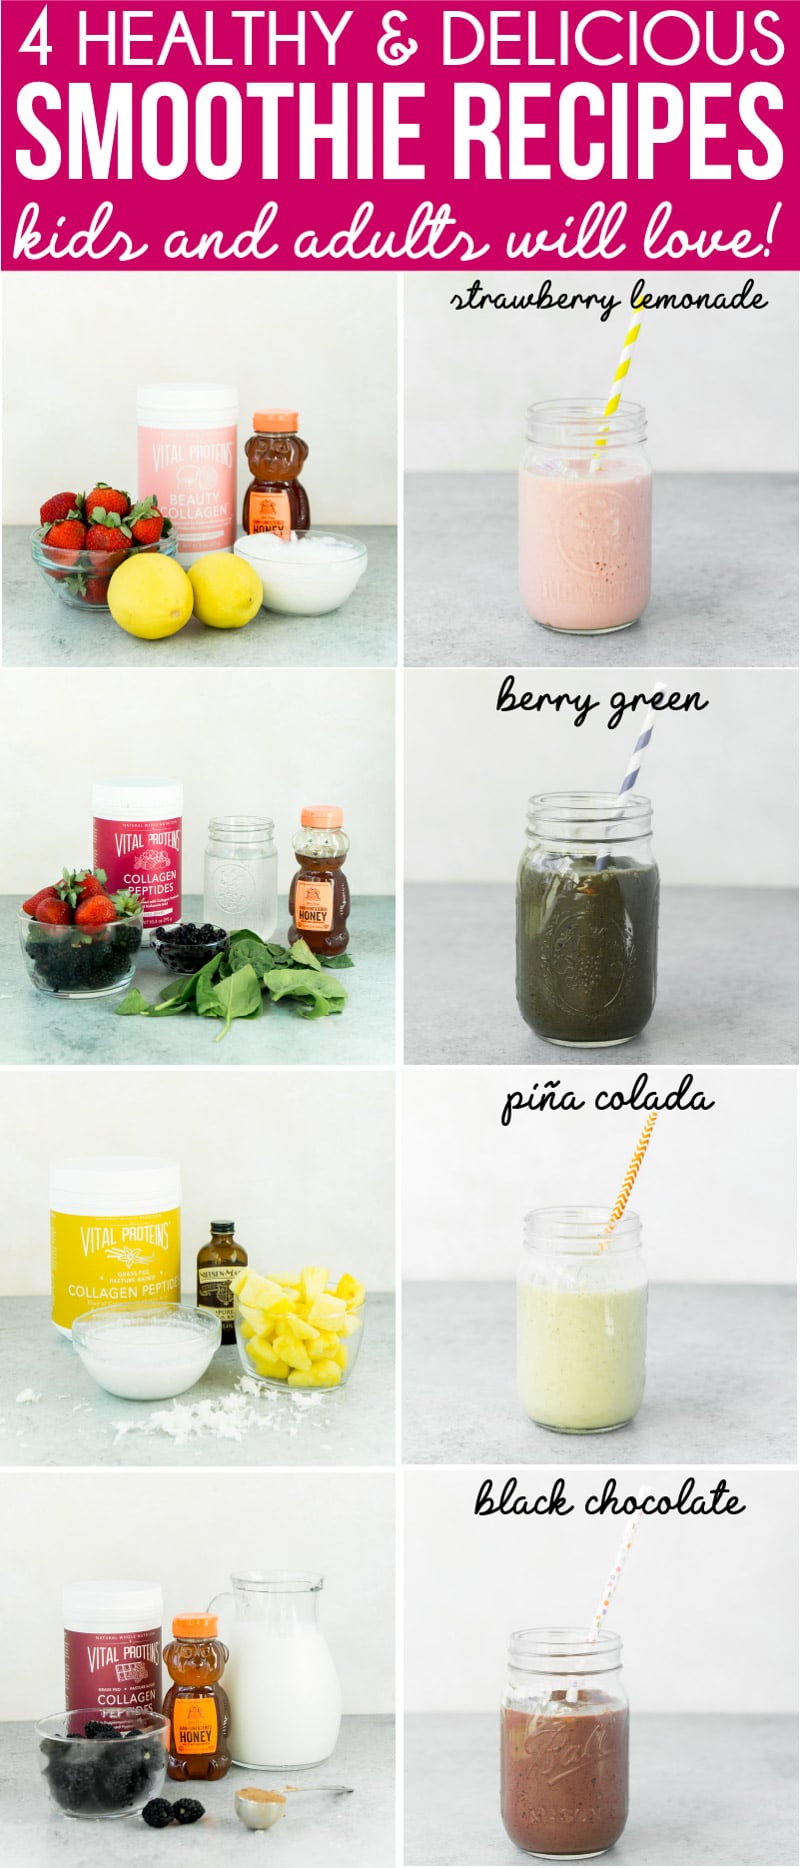 https://www.playpartyplan.com/wp-content/uploads/2018/10/healthy-smoothie-recipes-1-of-1.jpg